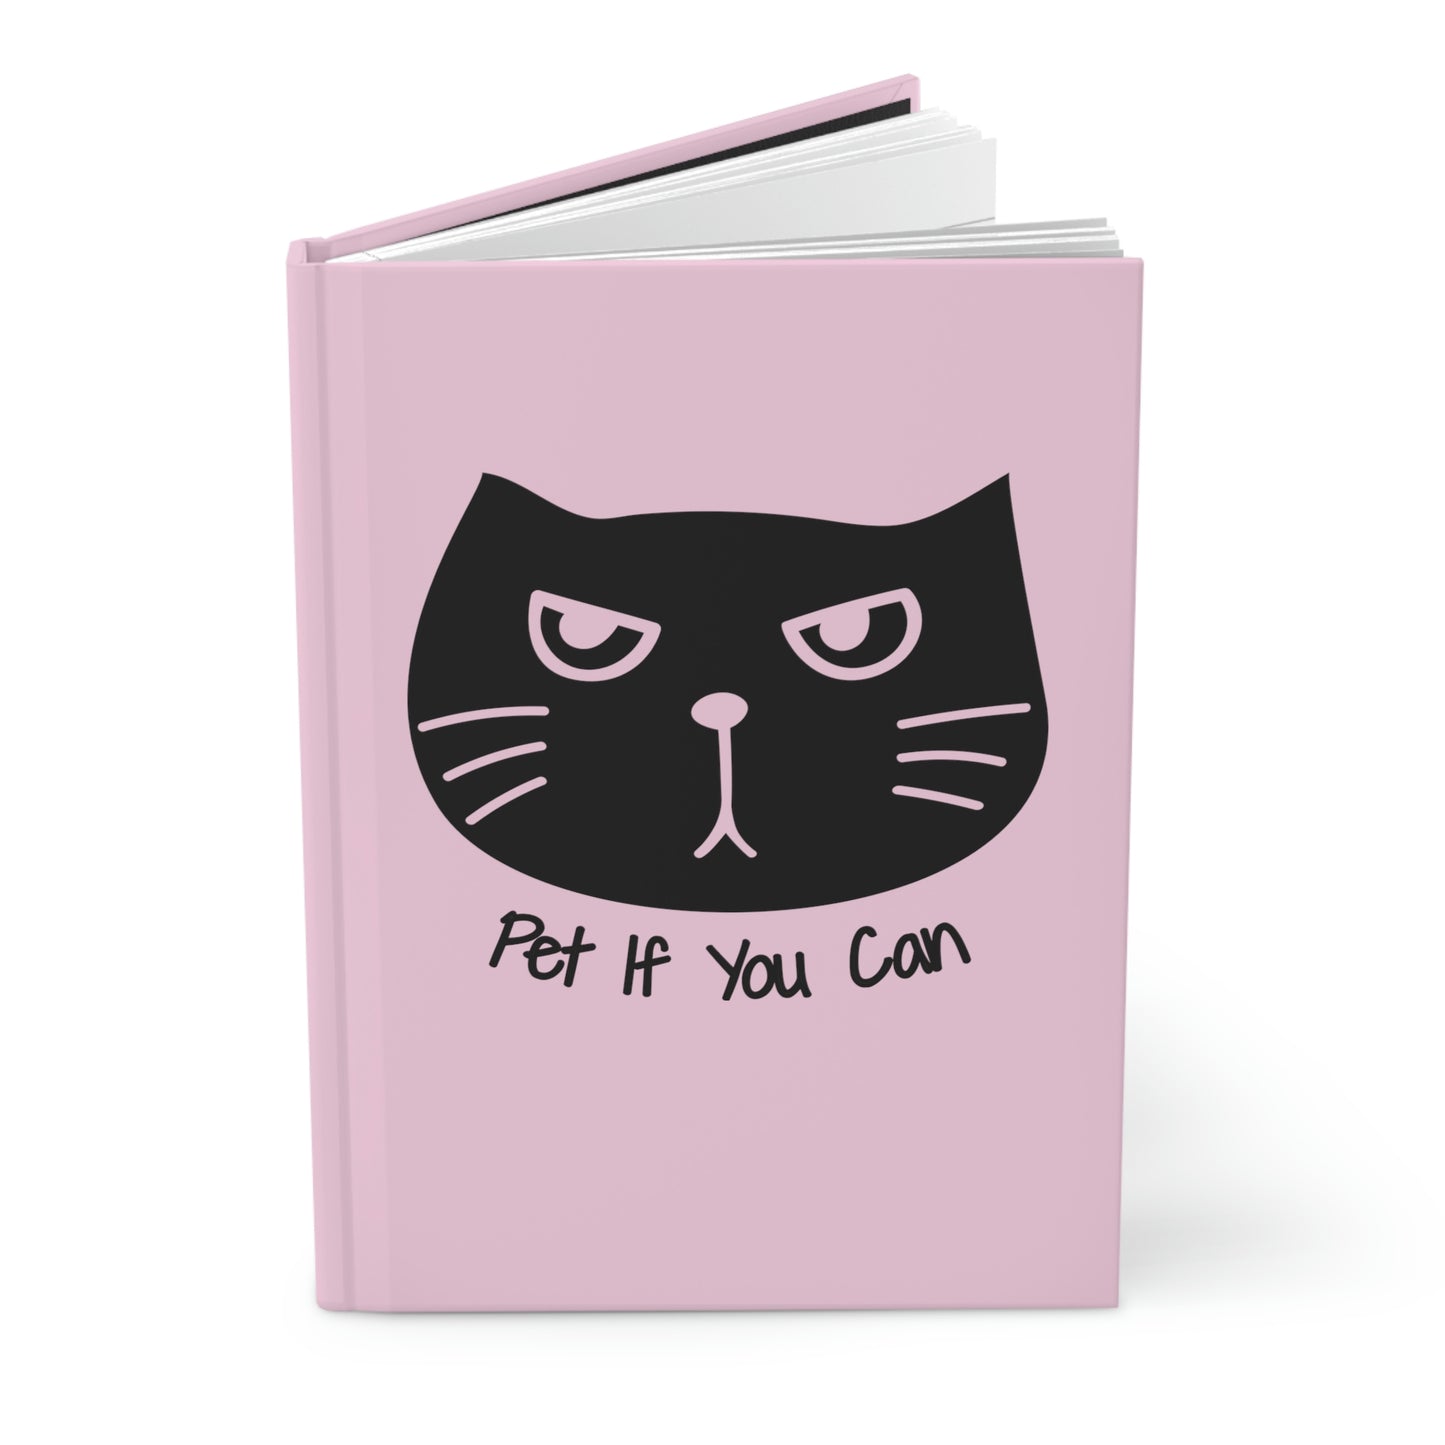 Funny black cat says "Pet If You Can" pink Hardcover Journal Matte notebook